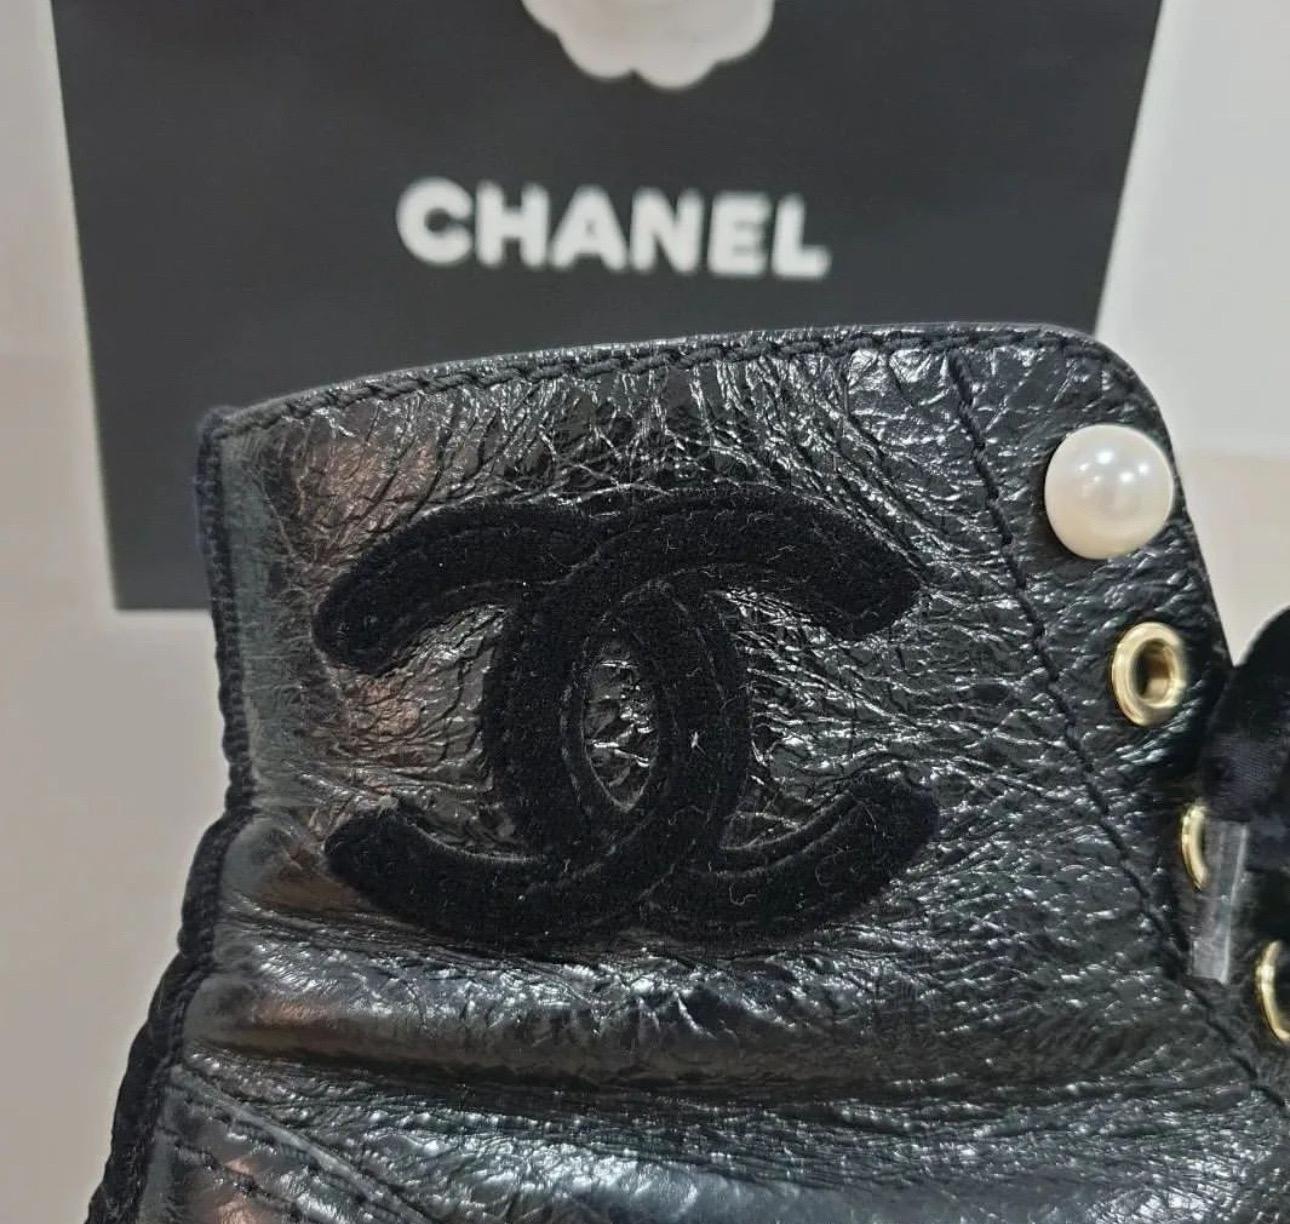 Chanel black crackled calfskin leather. 

Pearl detail and velvet laces. 

Heeled boot. 

Lace up. 

Colour: black.

Sz.37

Good condition. Signs of wear seen on pics.

No box. No dust bag.